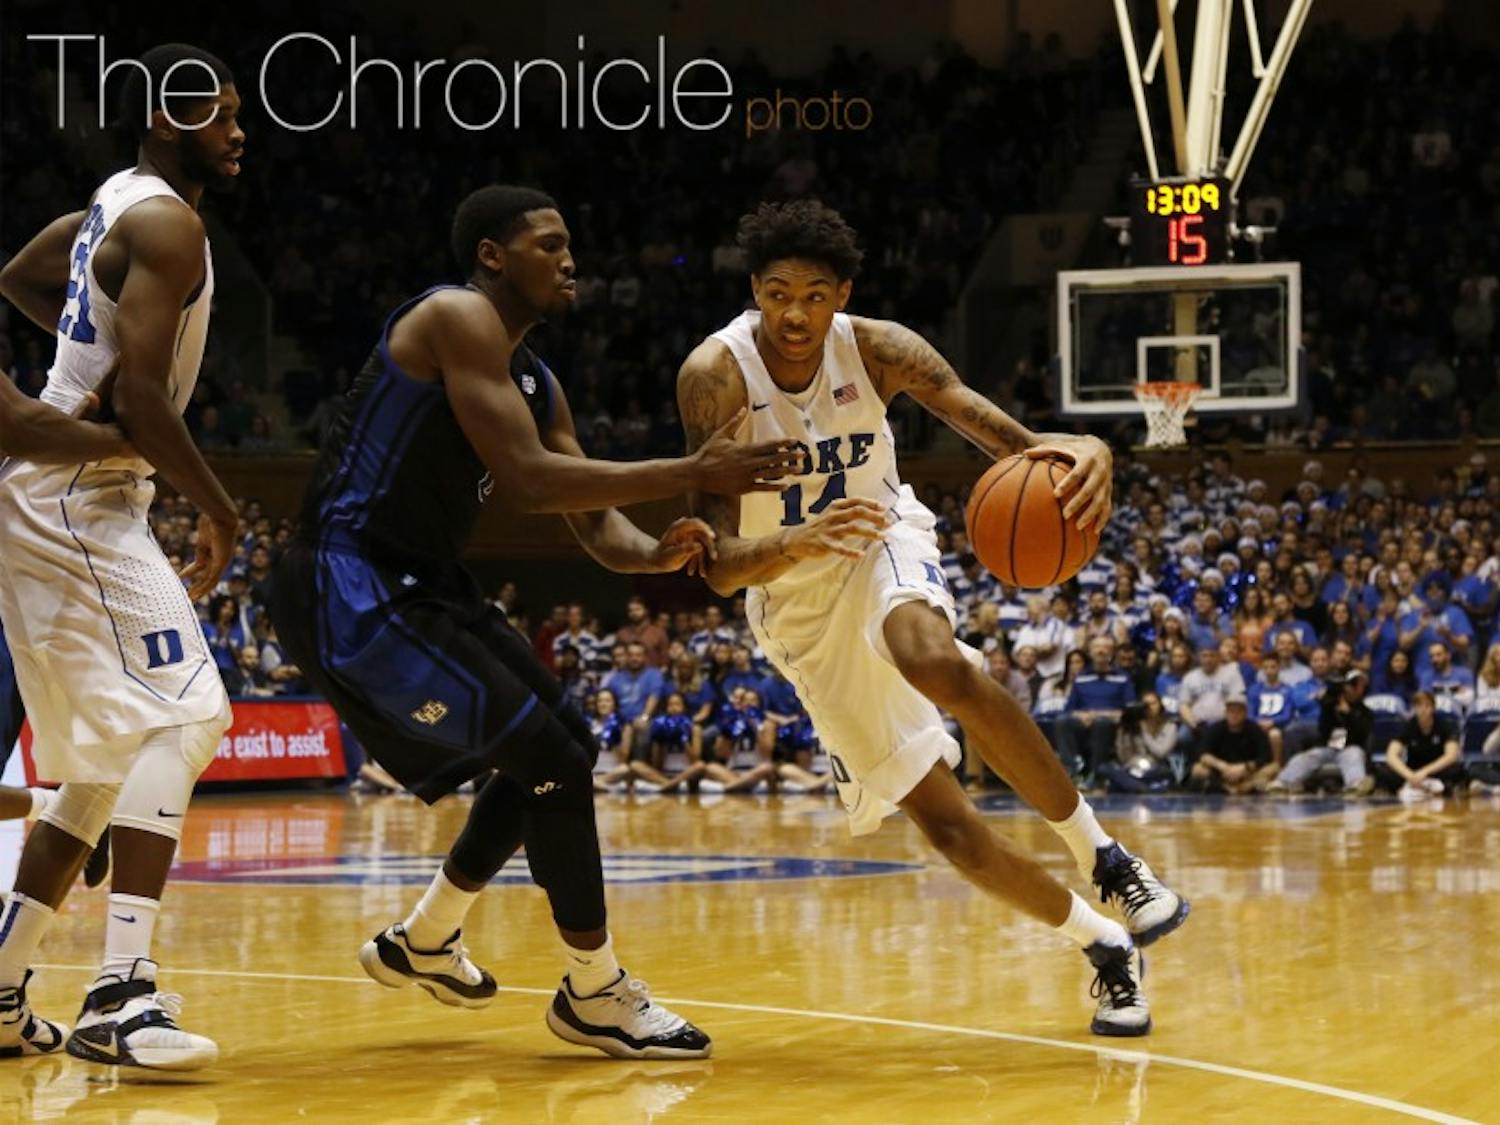 Freshman Brandon Ingram followed up his 24-point outburst against Indiana with 23 more Saturday against Buffalo.